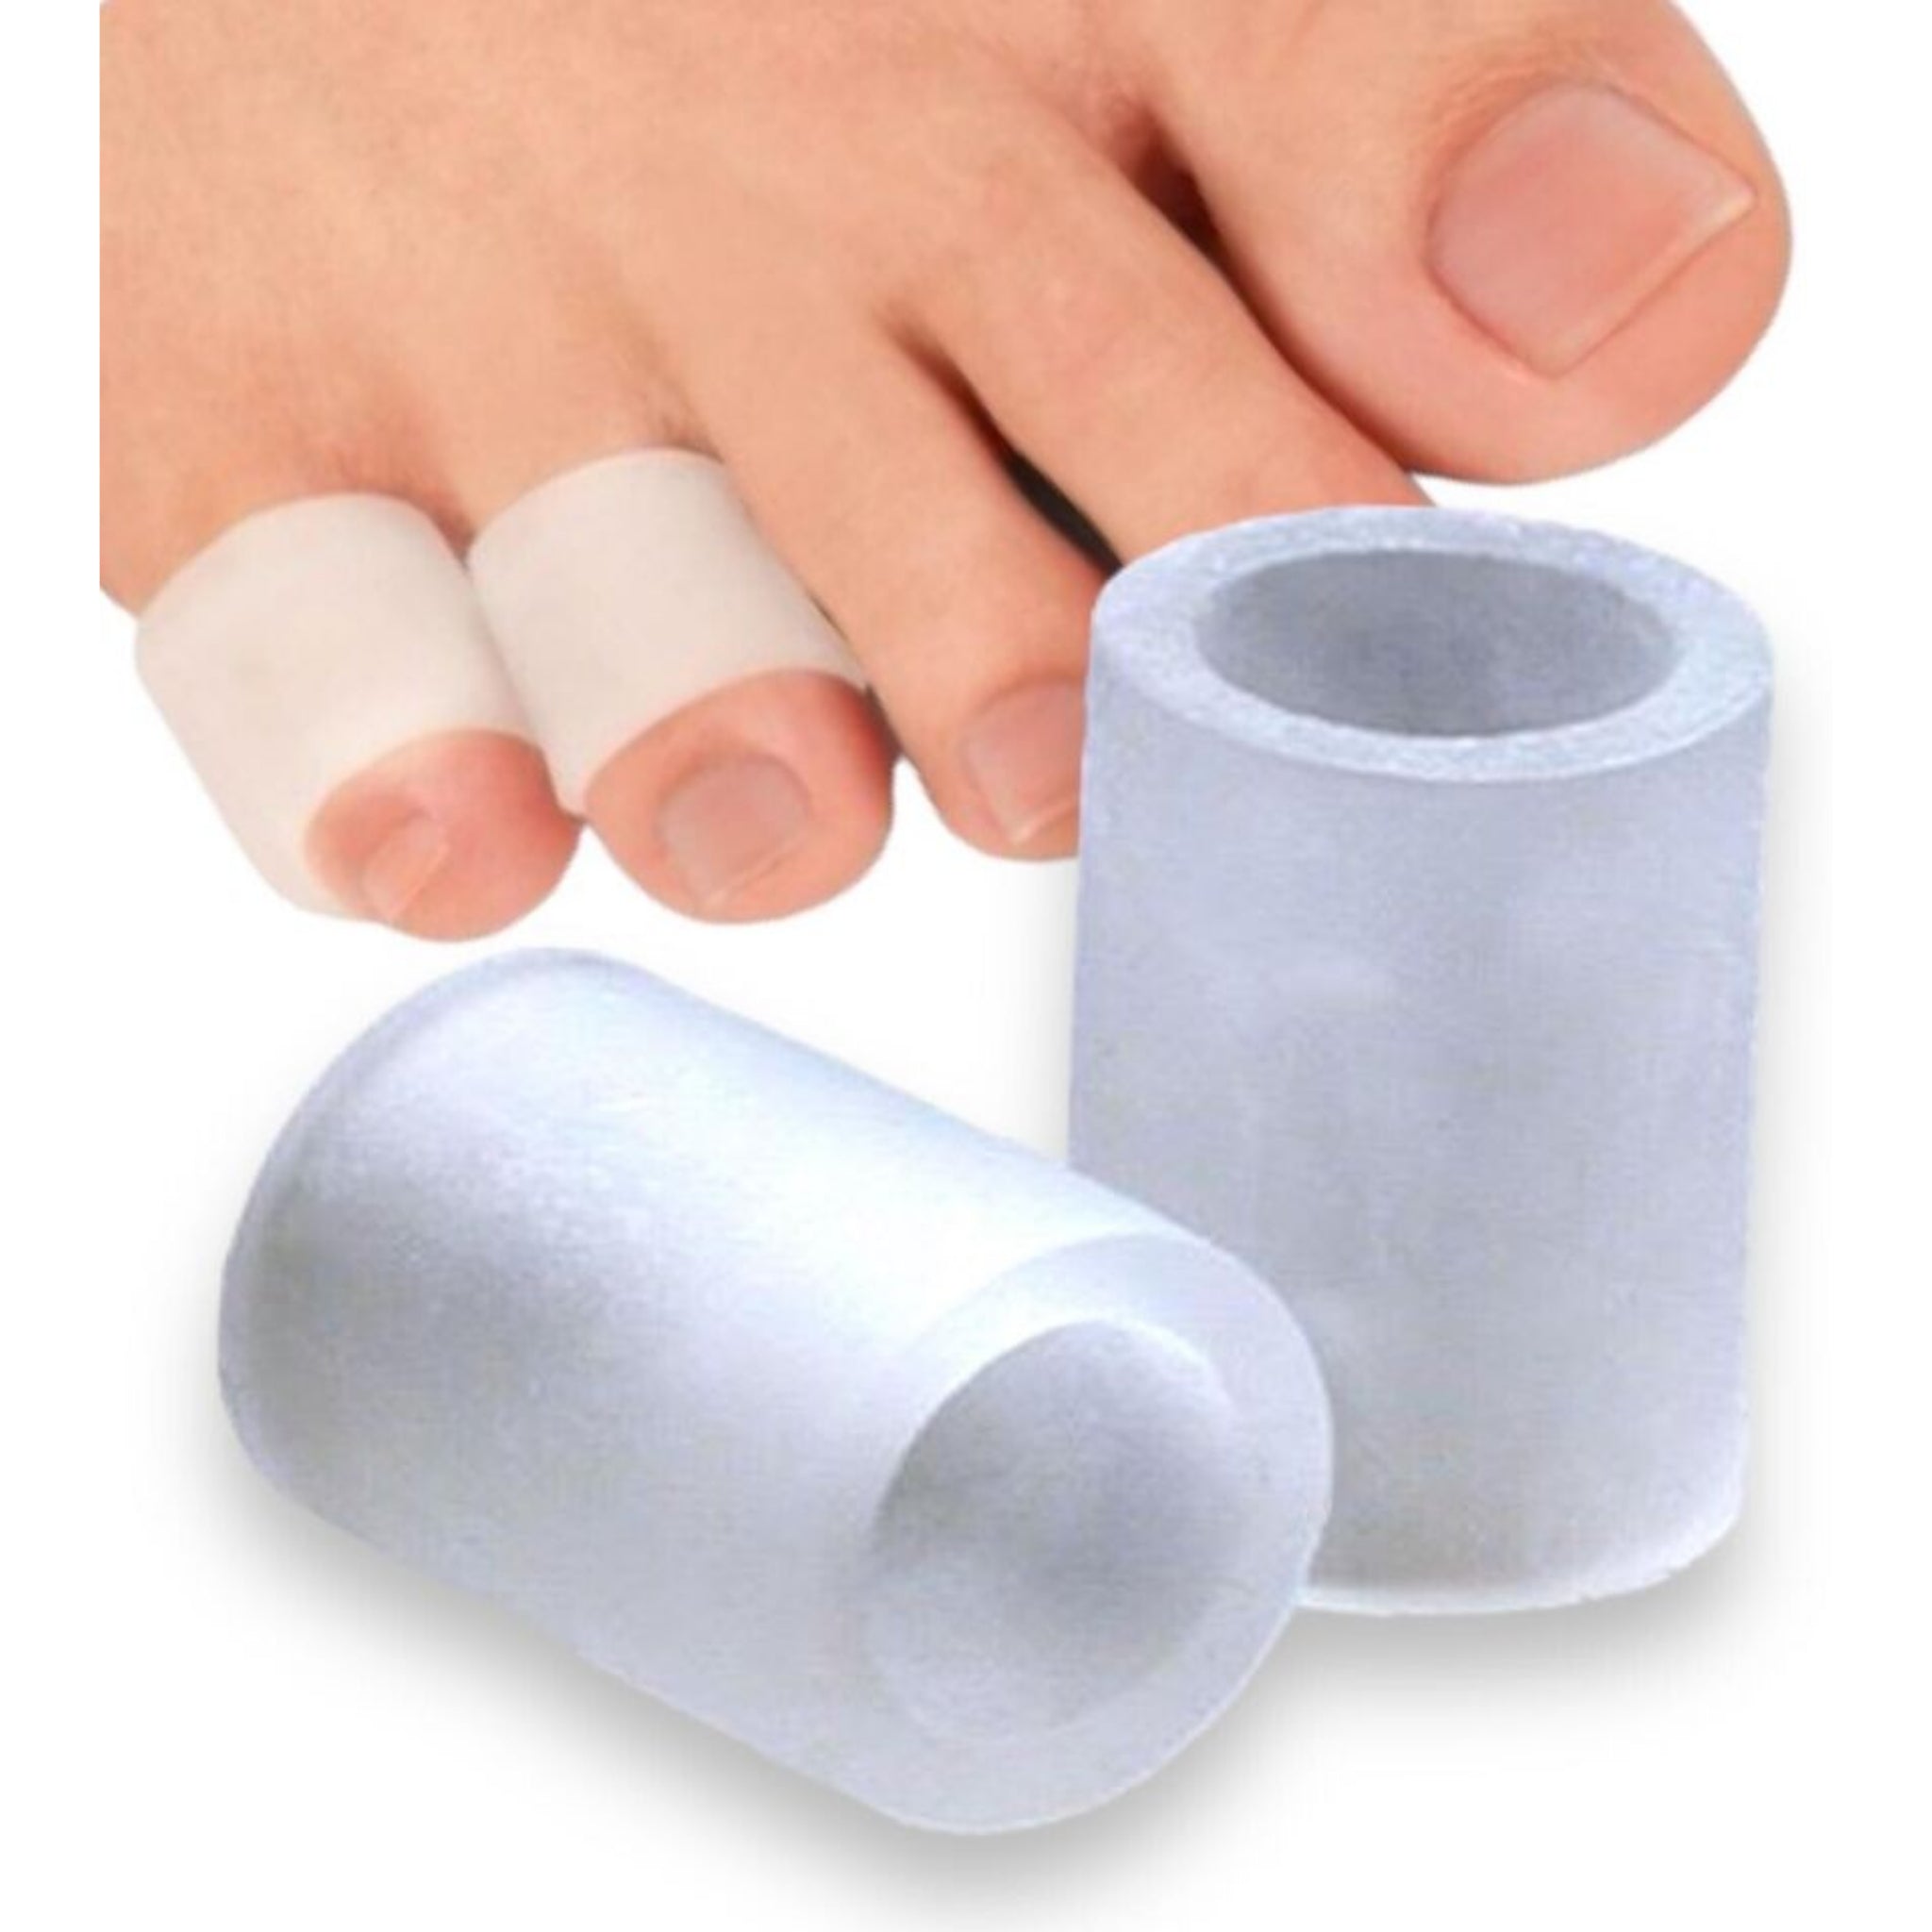 Beclen Harp 2 x Toe Separators for Overlapping Toes , Clear Gel Hammer Toe Straighteners